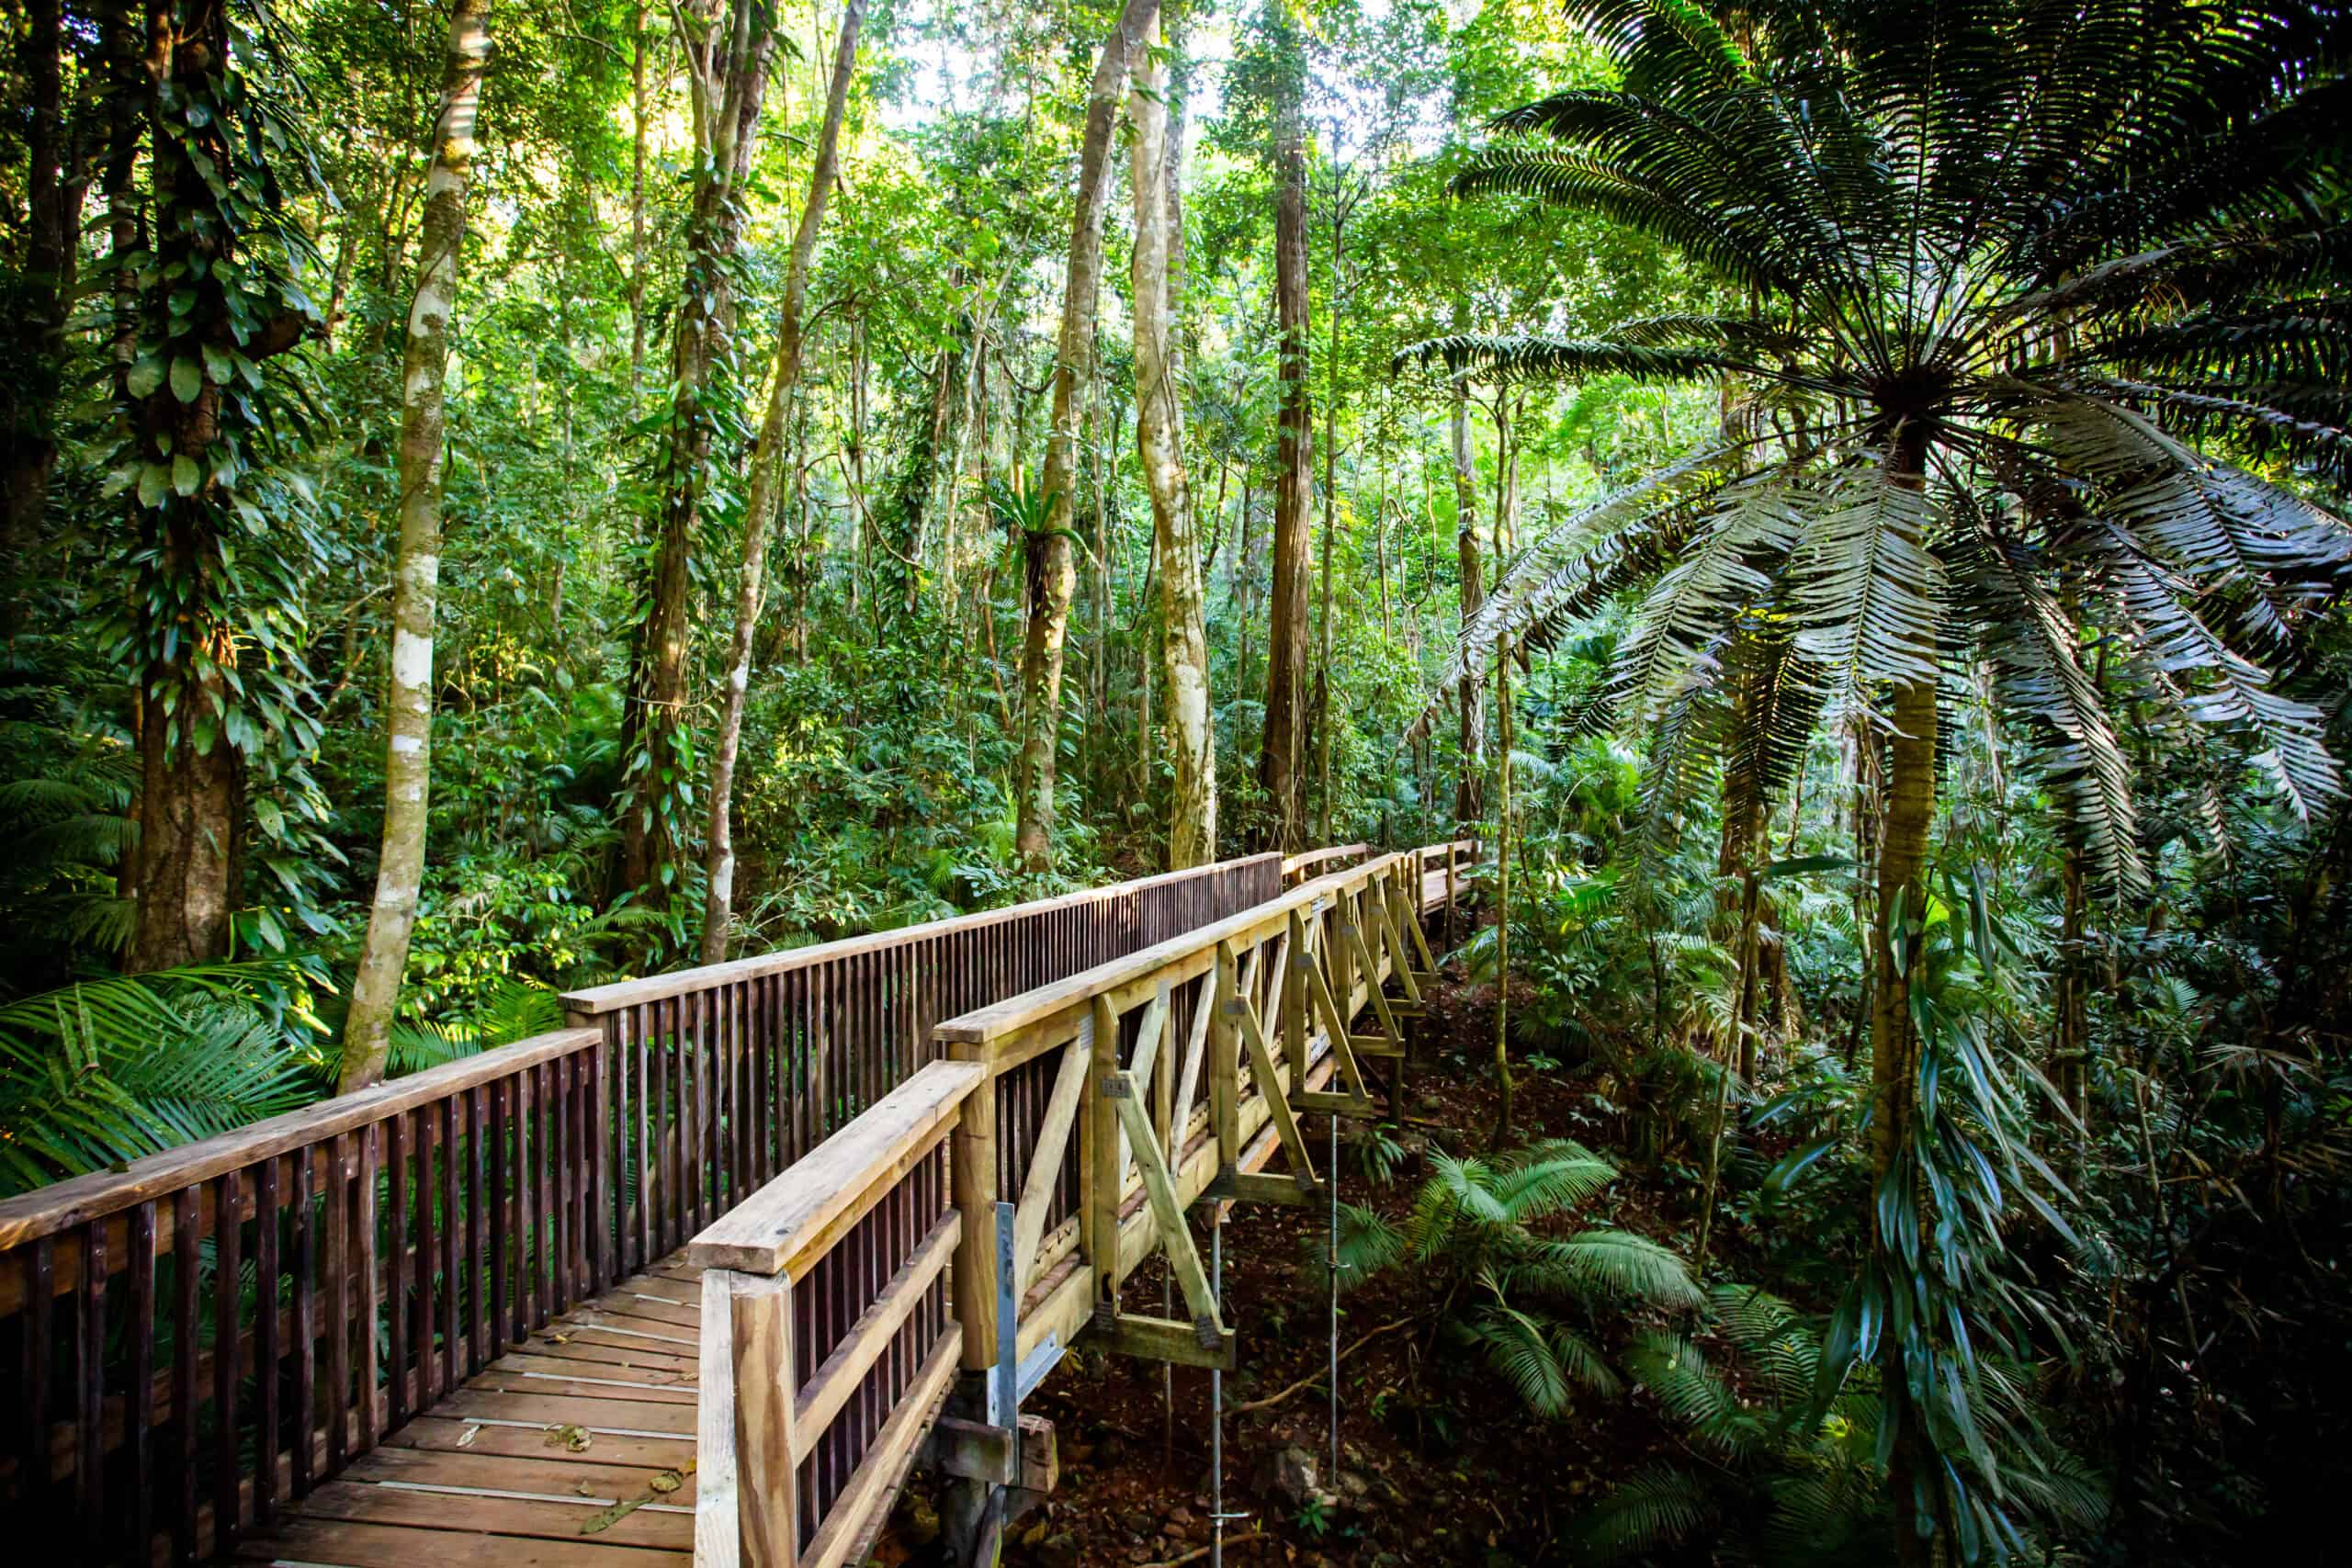 <p>Stepping into the Daintree Rainforest might ruin all other forests for you. This northeastern Australian treasure is the oldest tropical rainforest on Earth, boasting a lineage that stretches back over 180 million years, predating even the Amazon. </p> <p>Here, you wander through a living museum, home to ancient flora and unique creatures like the Bennett’s tree-kangaroo, ensconced in a lush canopy that teems with biodiversity. With its rich Indigenous heritage and eco-tourism ventures that range from river cruises to canopy tours, the Daintree offers an immersive escape into nature’s wonders—set foot here, and a simple woodland hike elsewhere might just never compare.</p>